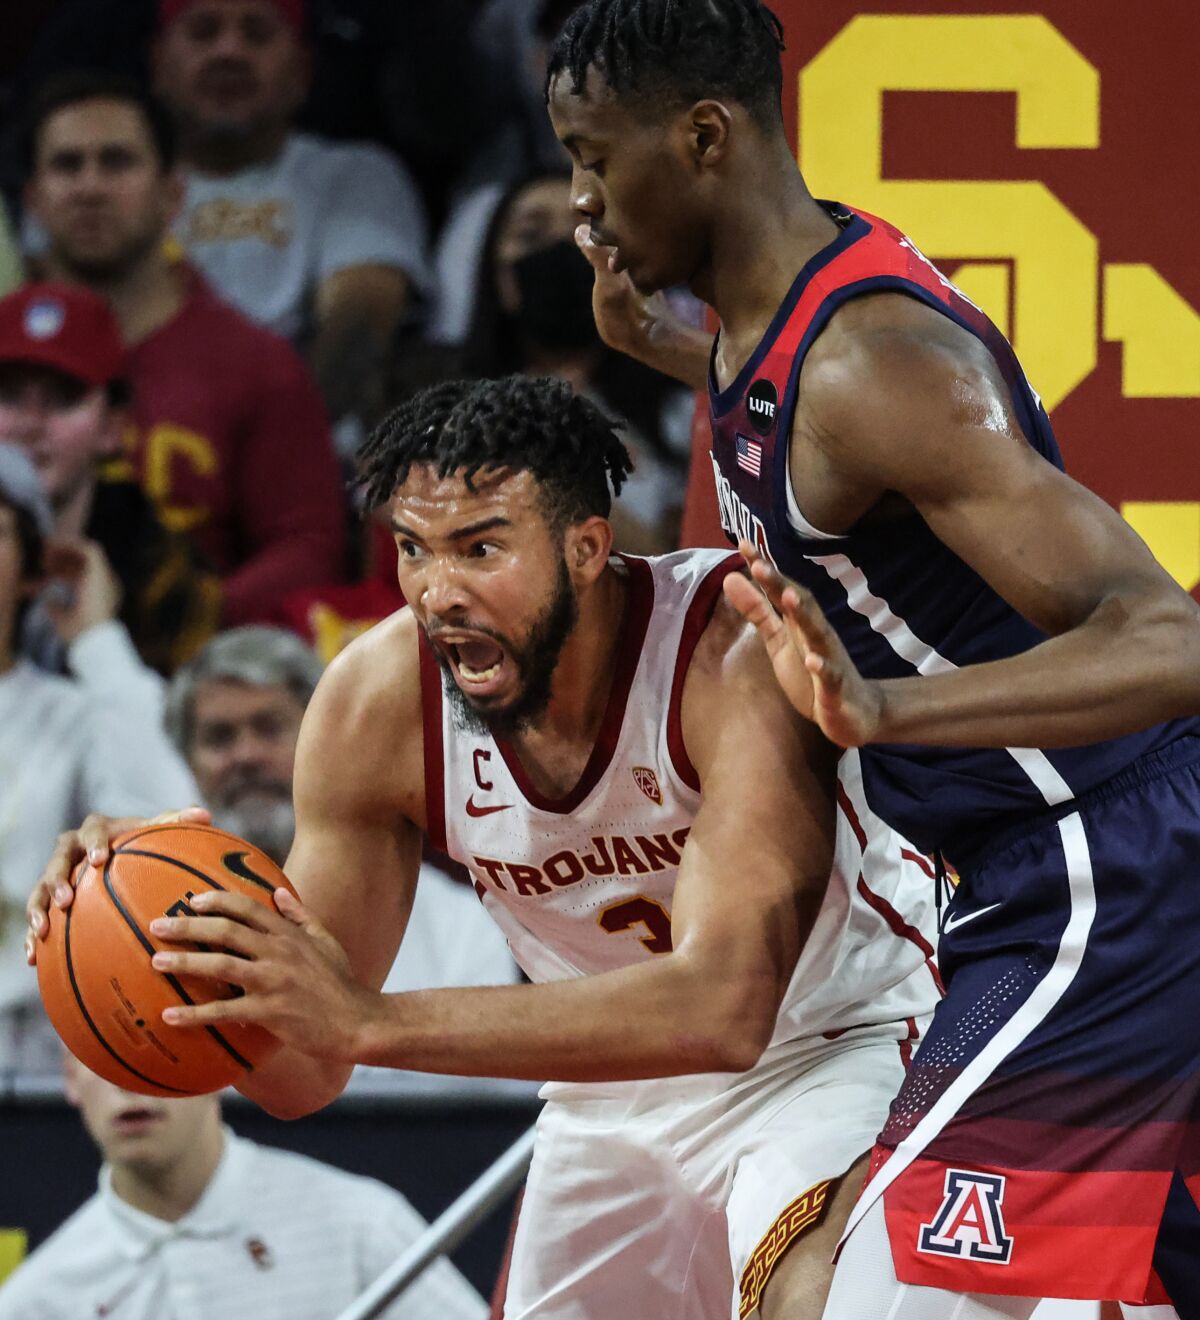 USC forward Isaiah Mobley secures a rebound in front of Arizona center Christian Koloko.